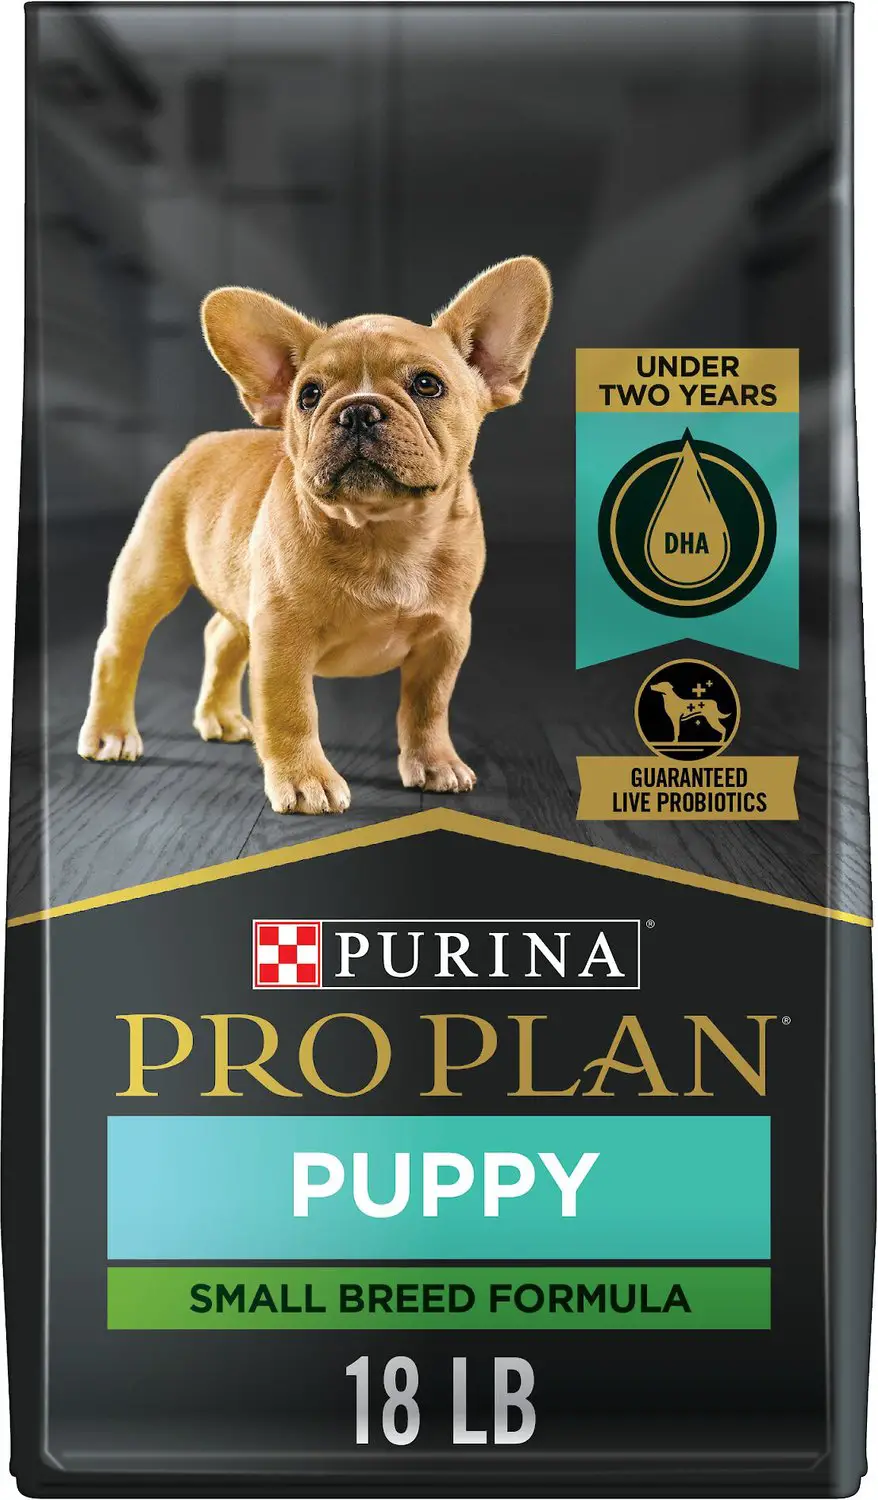 Purina Pro Plan Focus Puppy Small Breed Formula Dry Dog Food, 18